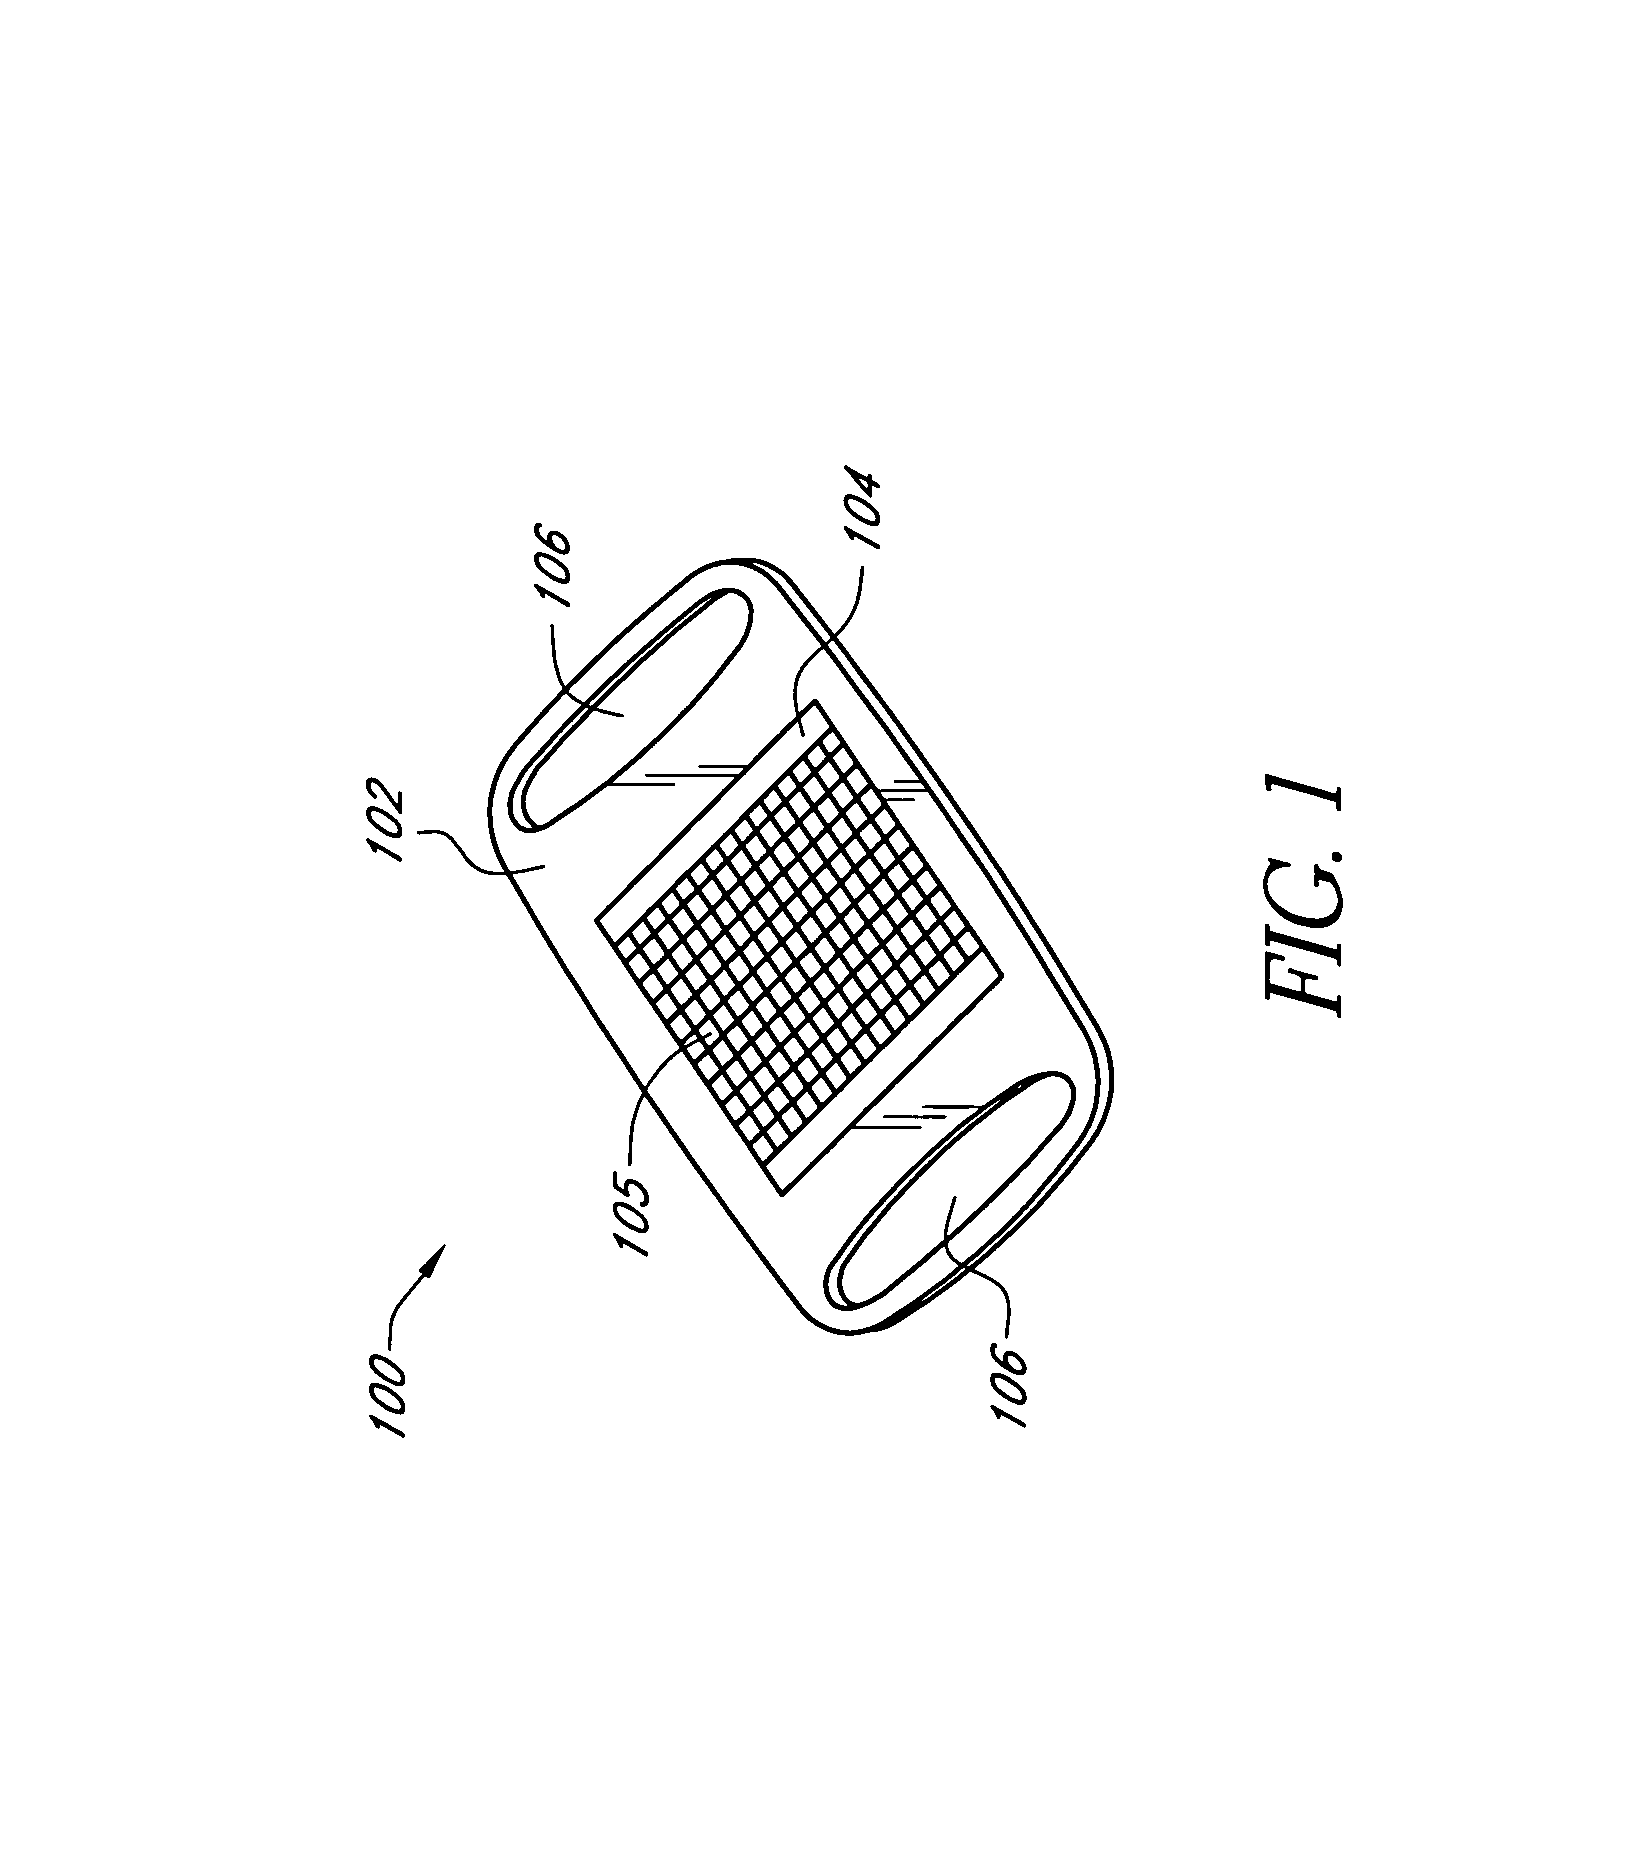 Device for capturing thermal spectra from tissue